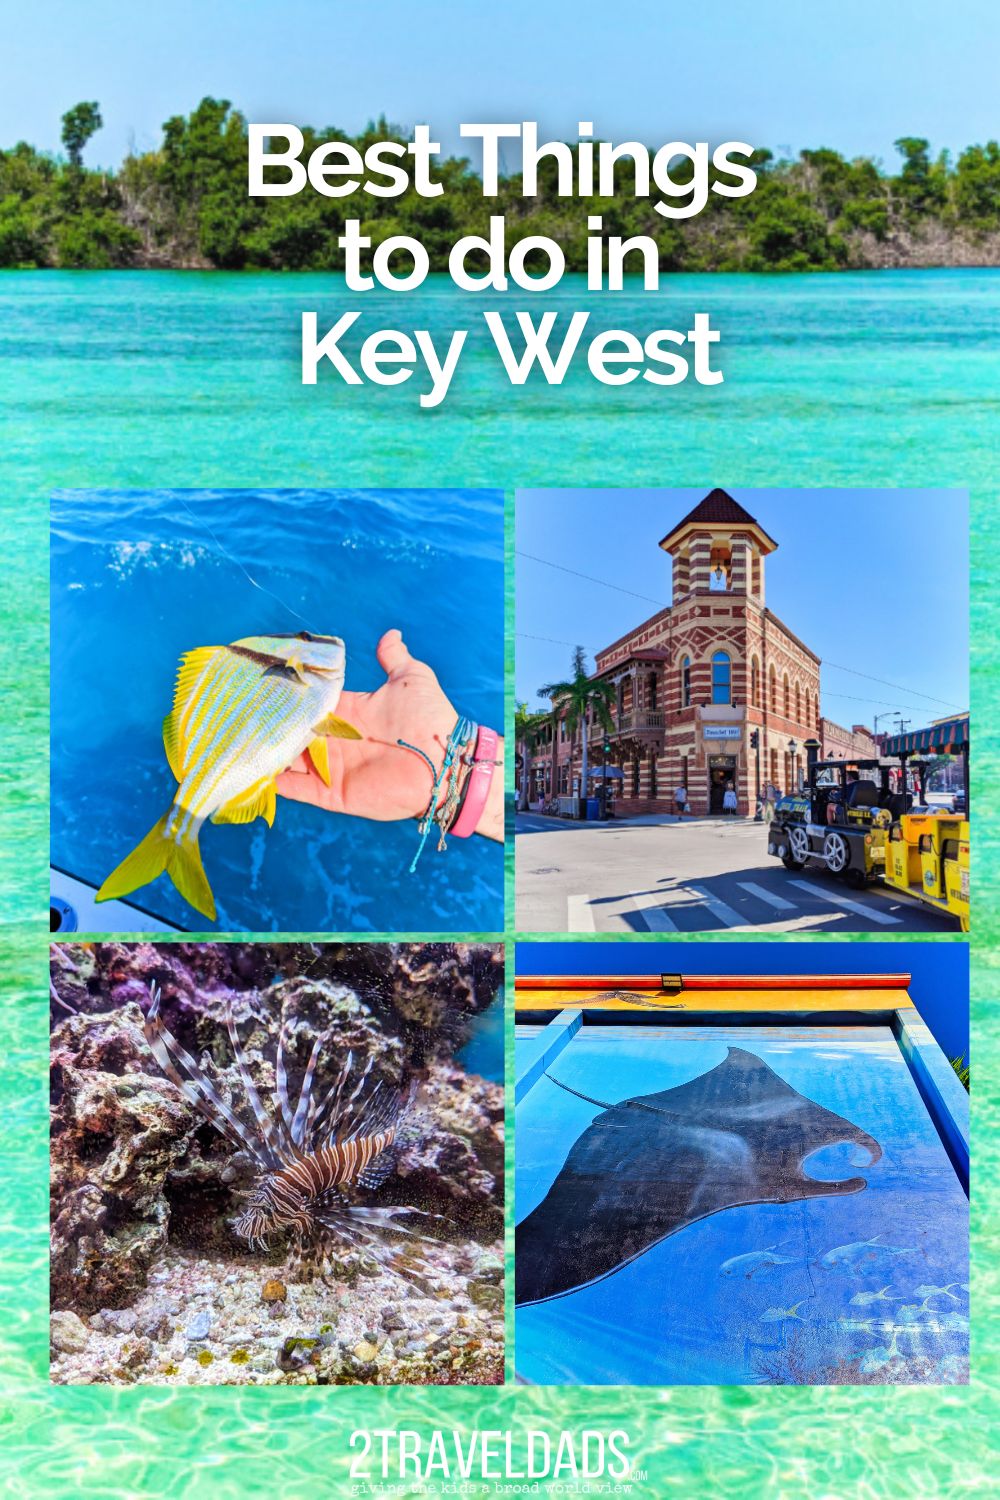 What are the best things to do in Key West? There may be too many to count! Here are a few of the things we think will make your trip to the lower keys and Key West extraordinary.